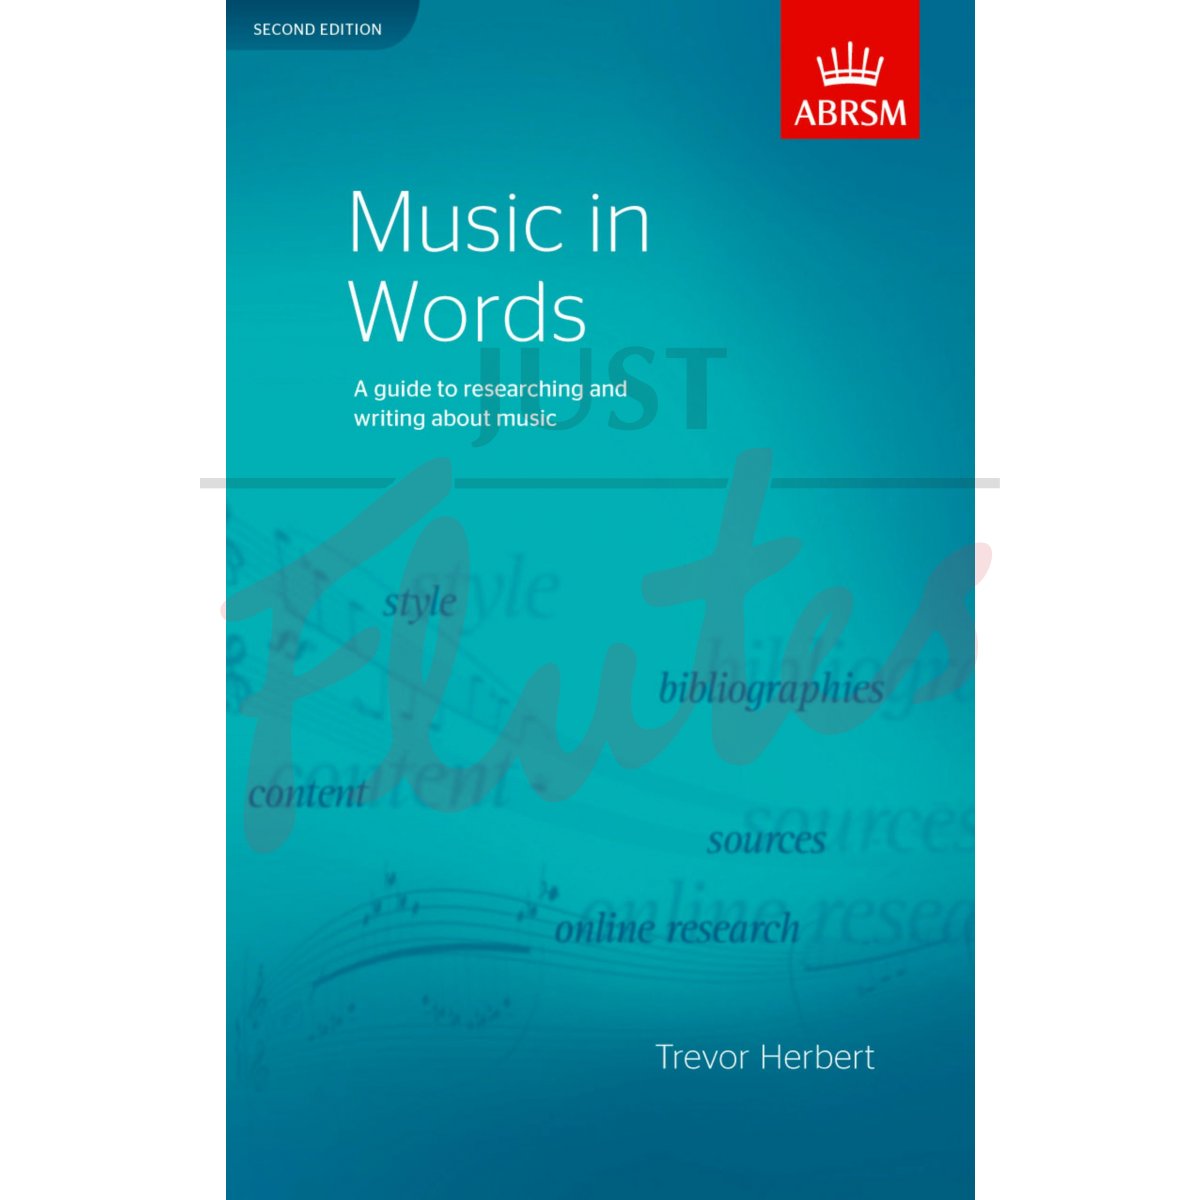 Music in Words - A Guide to Researching and Writing about Music